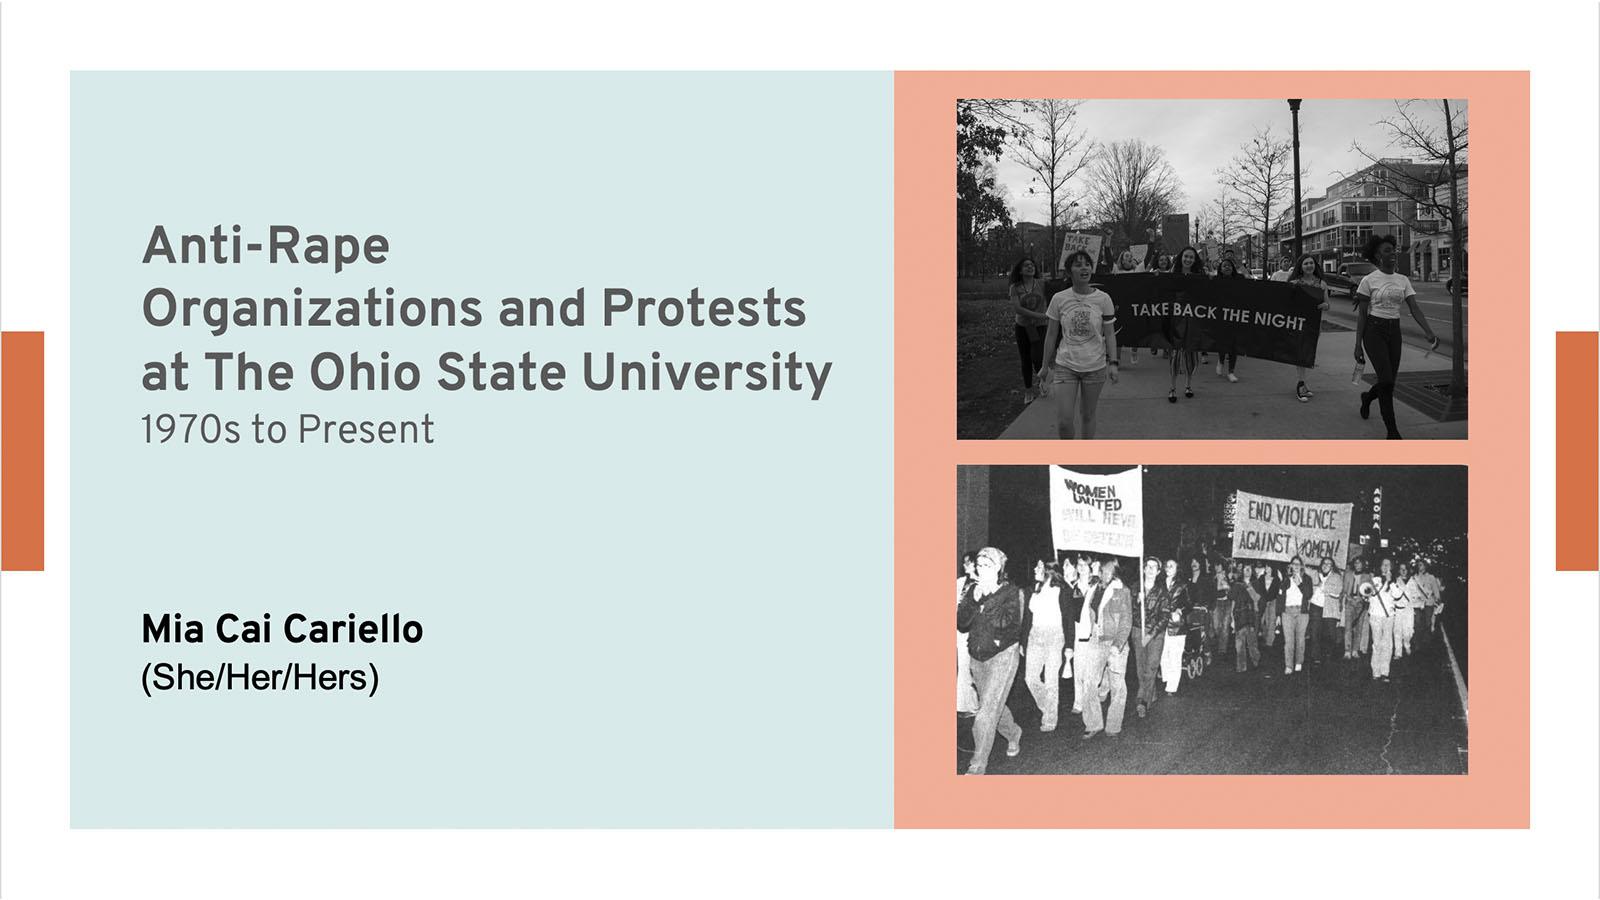 PowerPoint Slide that reads "Anti-Rape Organizations and Protests at The Ohio State University: 1970s to Present"